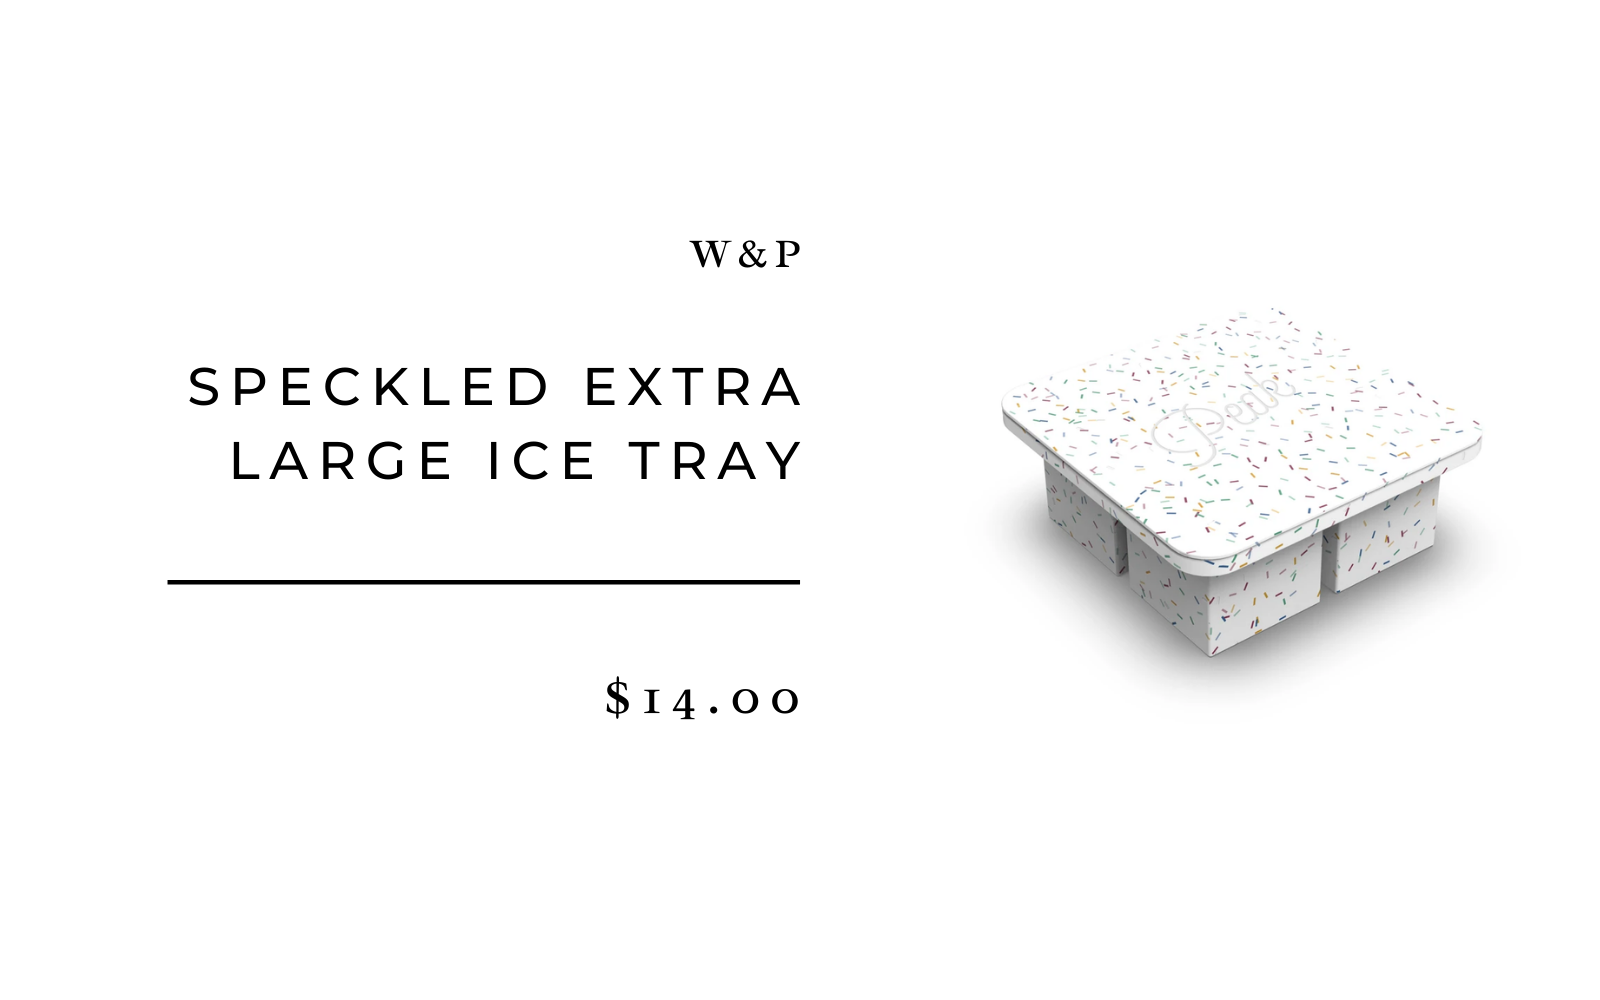 Speckled Extra Large Ice Tray